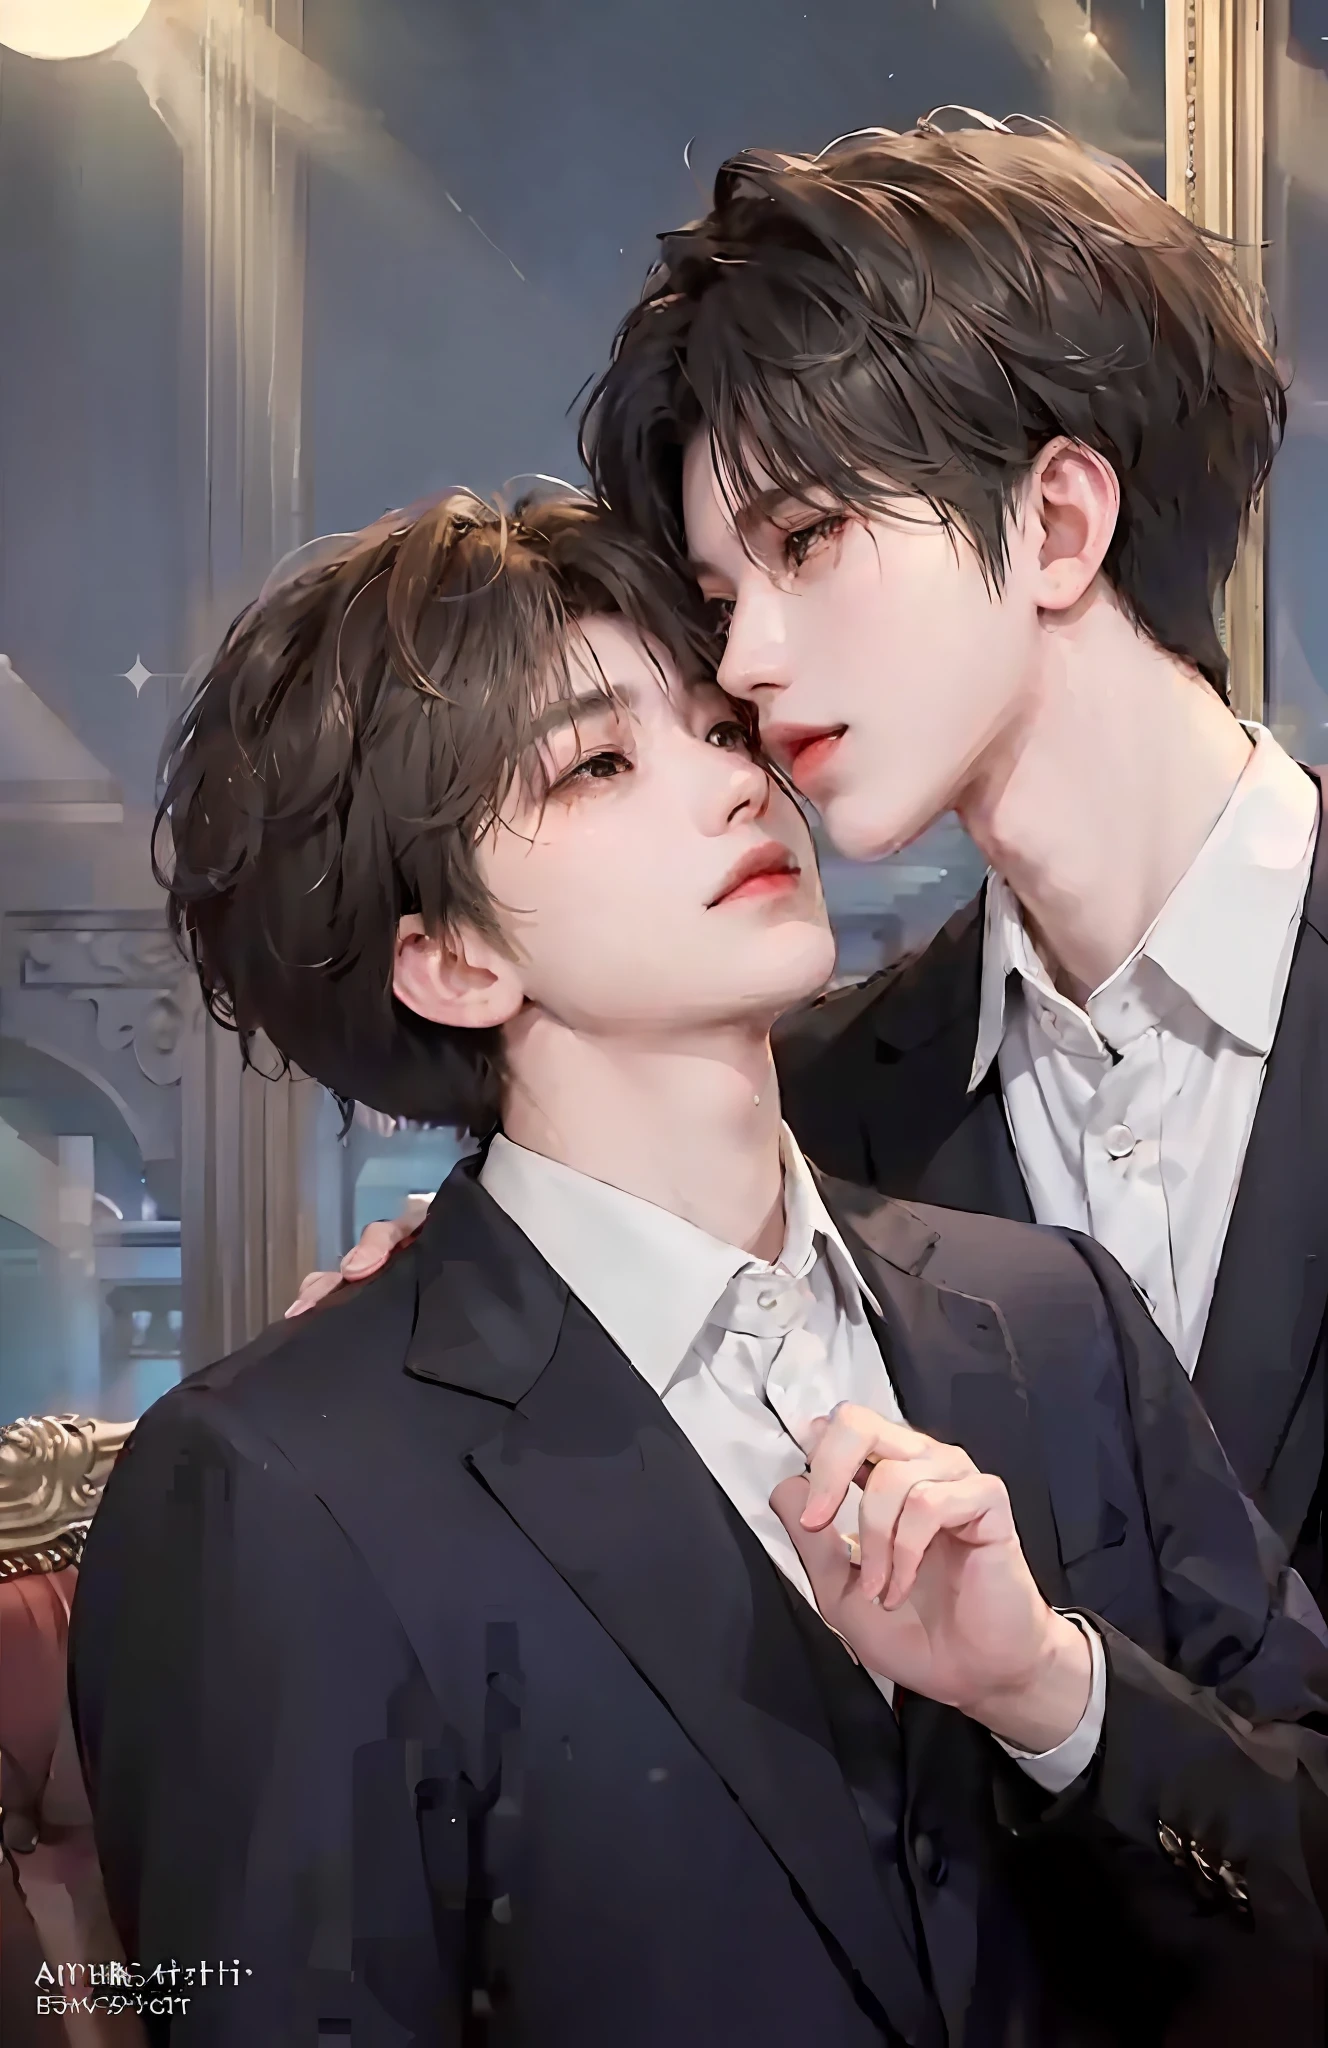 Masterpiece, top quality, two men, adult, in a suit, kiss on the neck, tall muscles, handsome and delicate eyes, intricate details, clear water, moonlit night, smile, aesthetic, romantic, dreamy, kissing, kiss